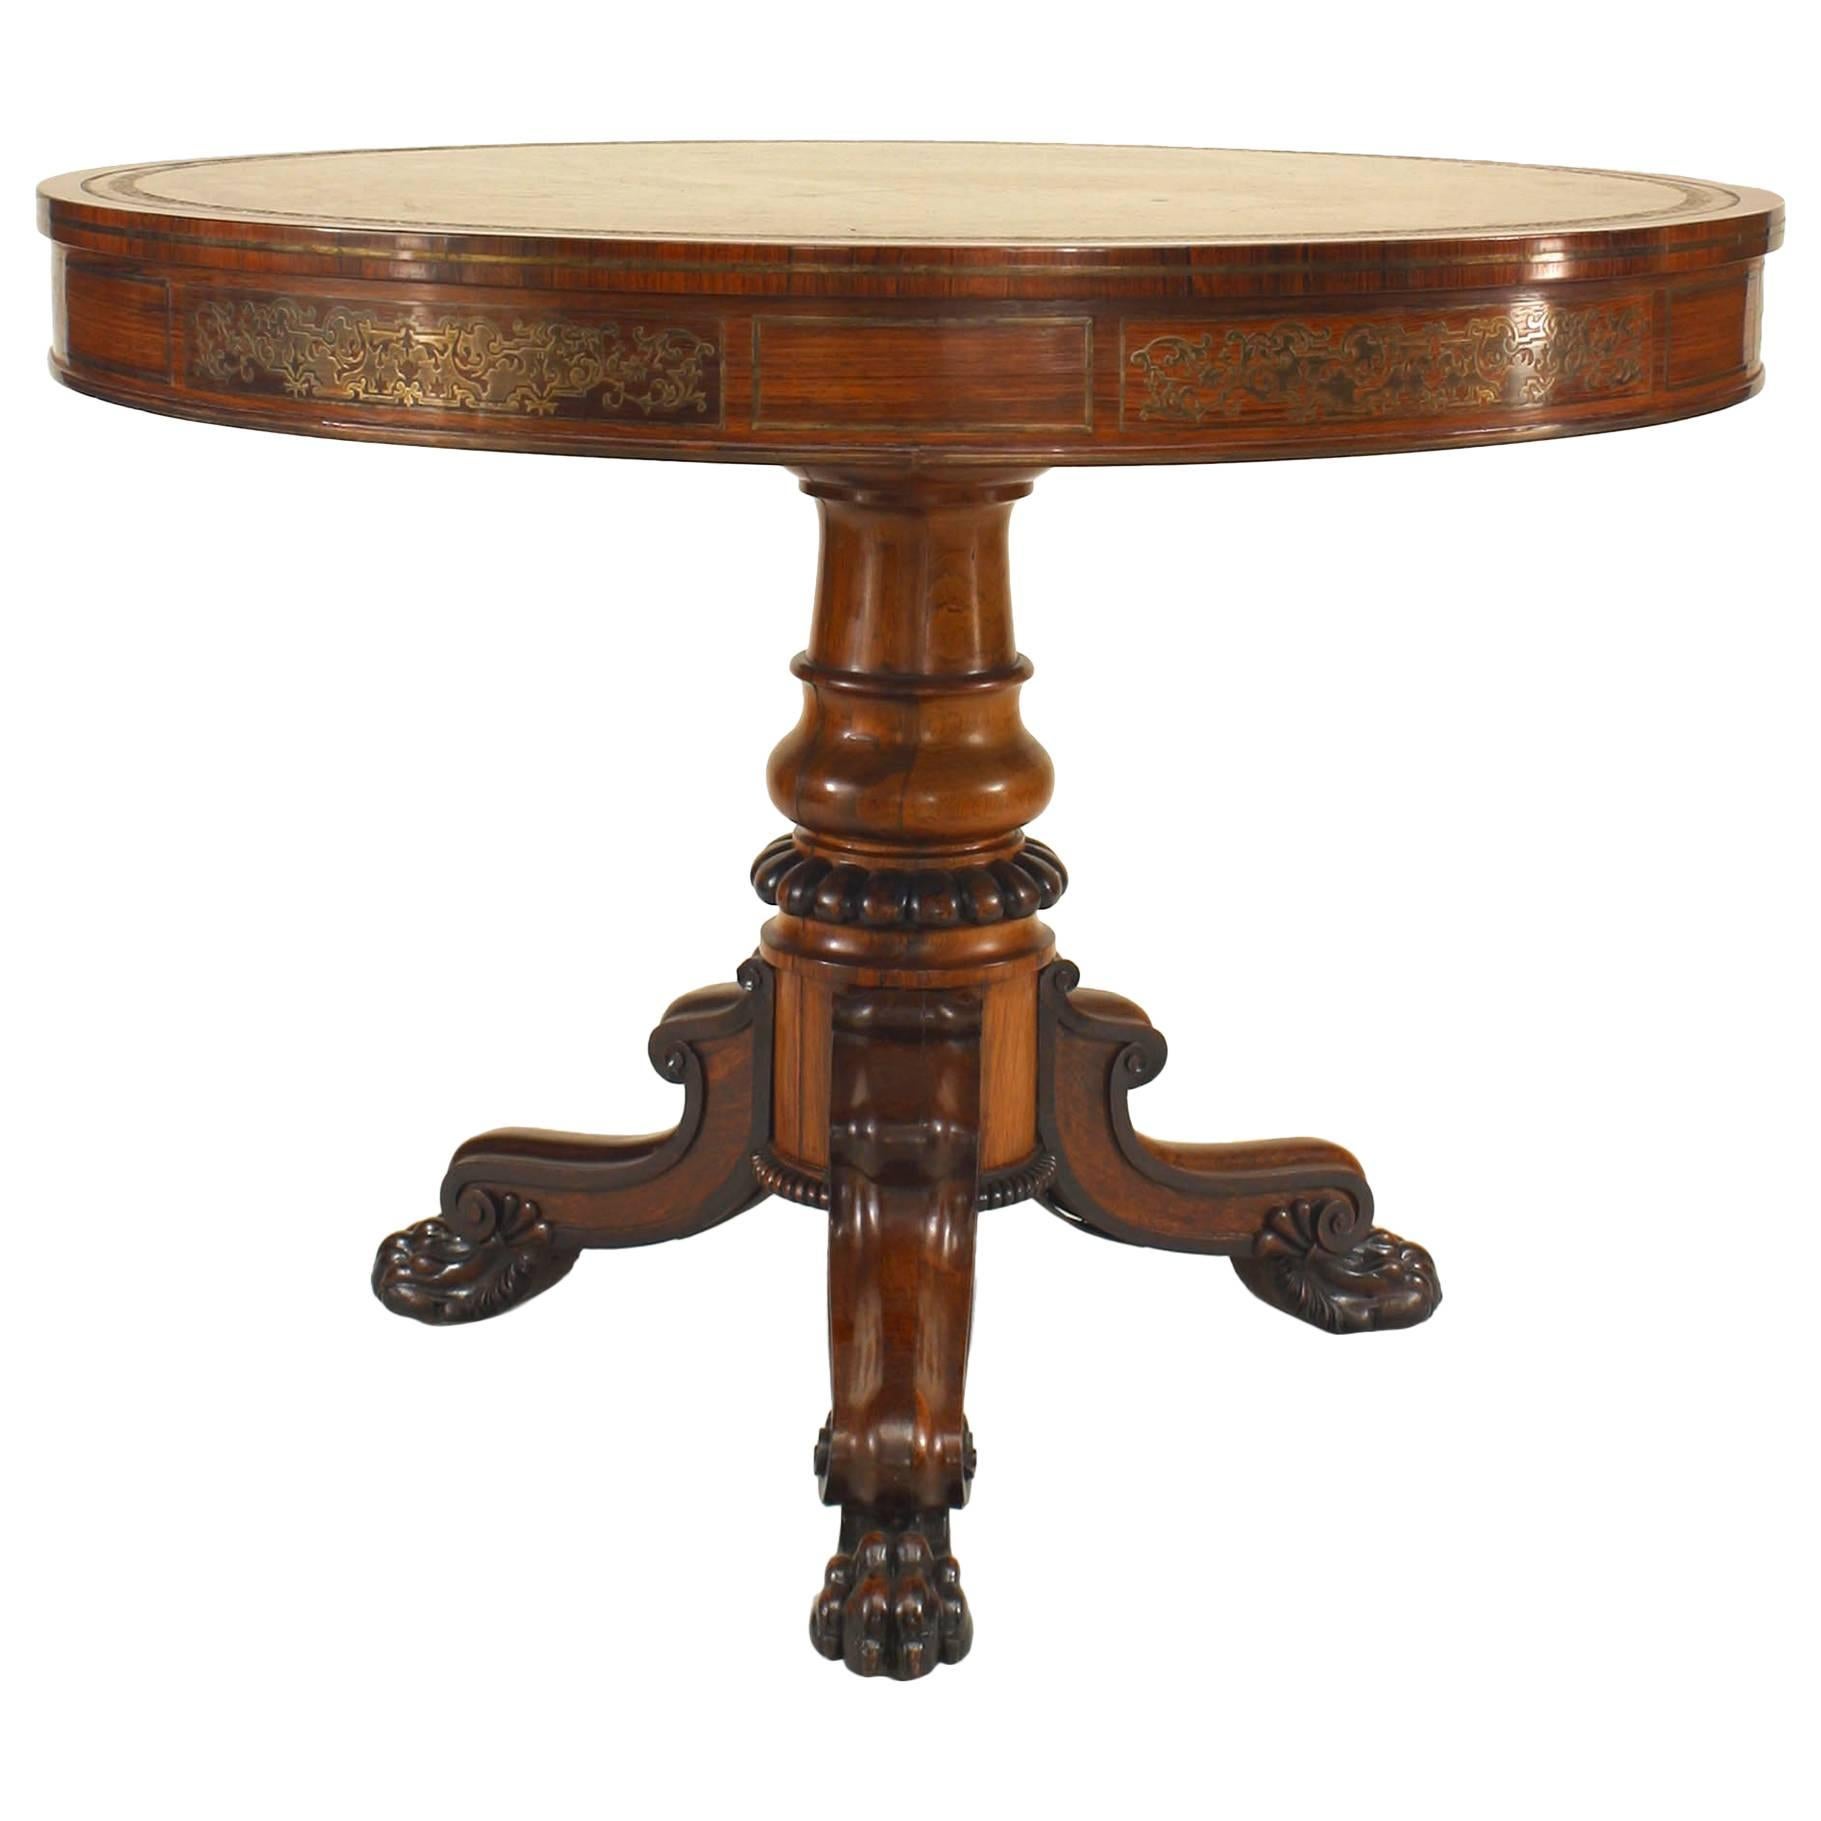 English Regency Rosewood Centre Table